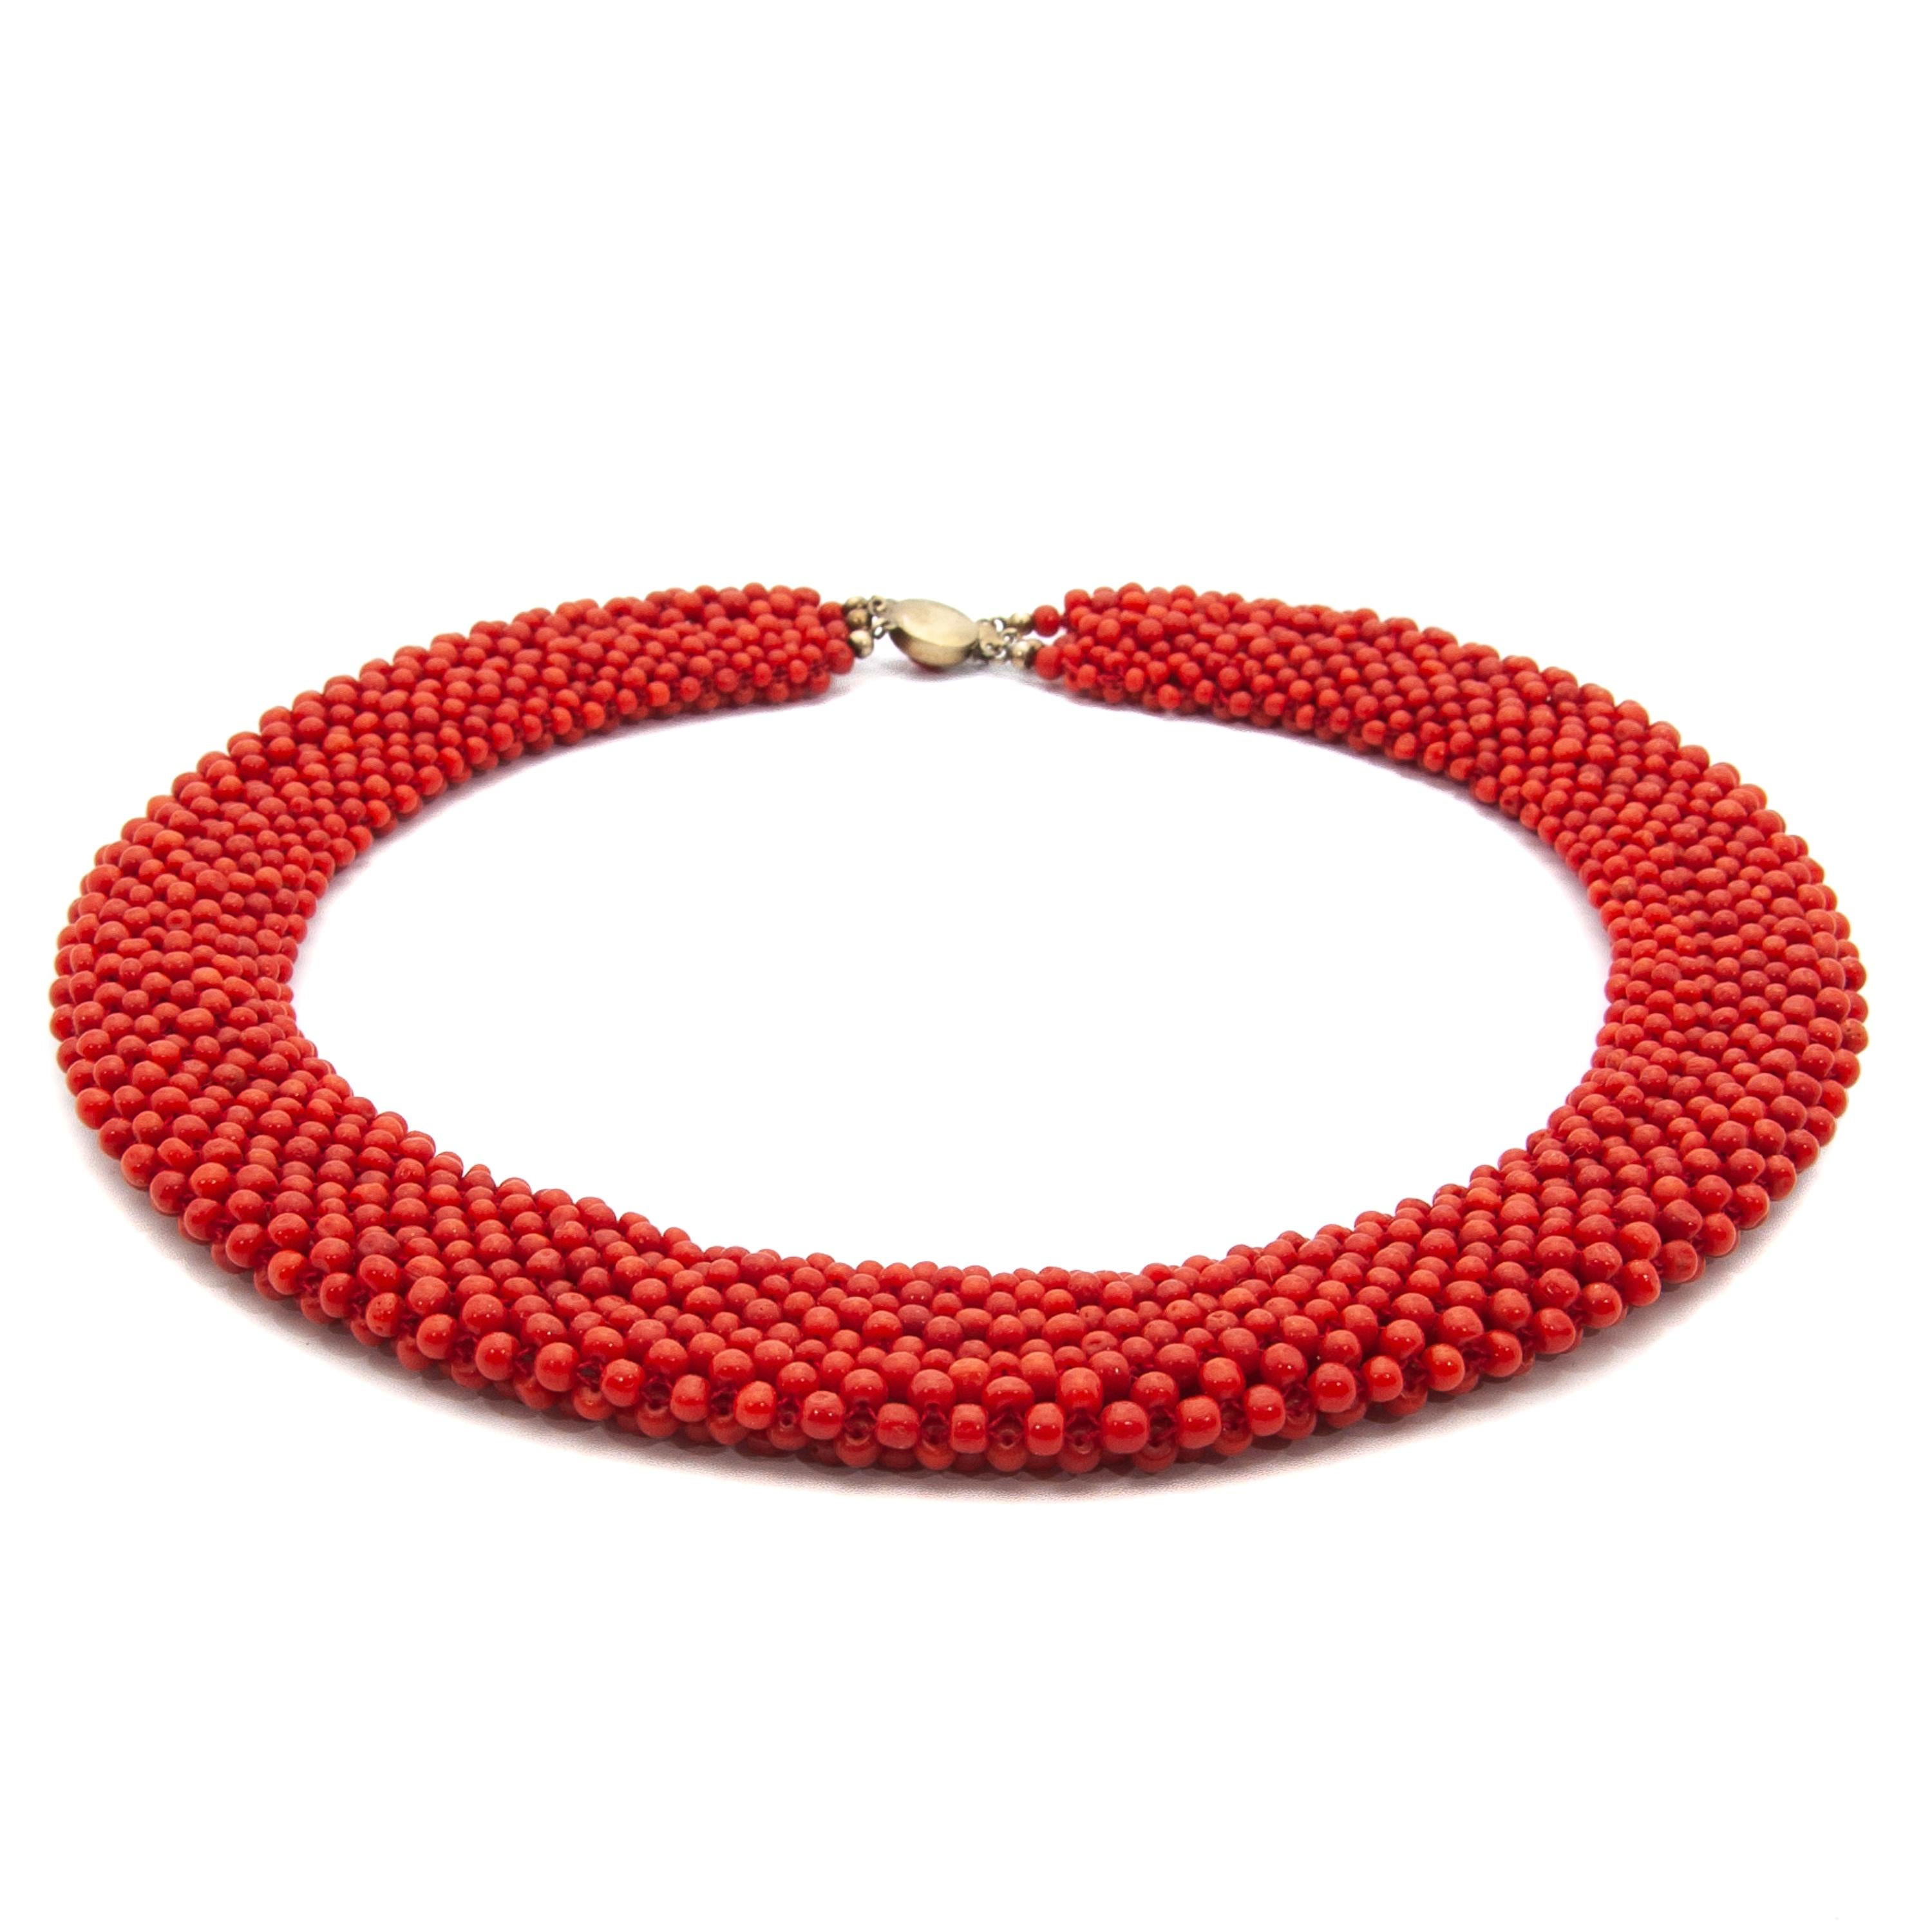 Women's Red Coral Woven Beaded Necklace